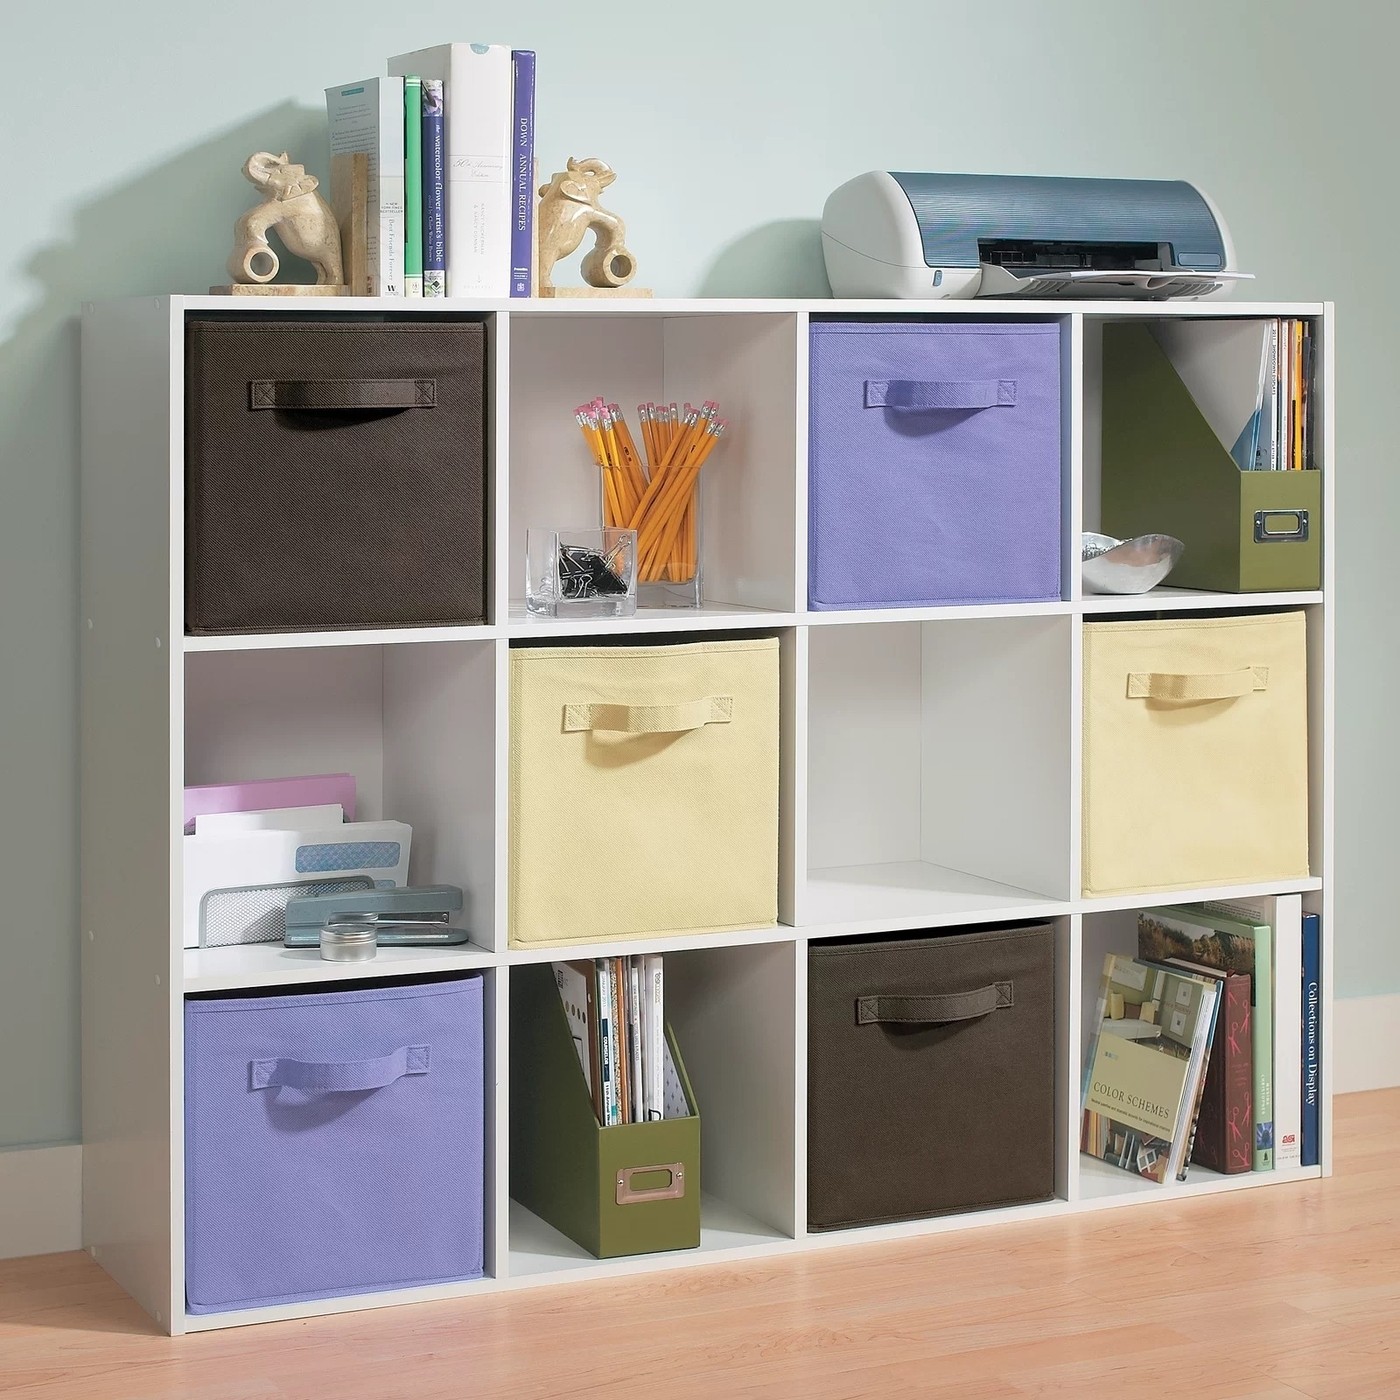 Playroom Organization Ideas: Storage Solutions for Space of All Sizes ...